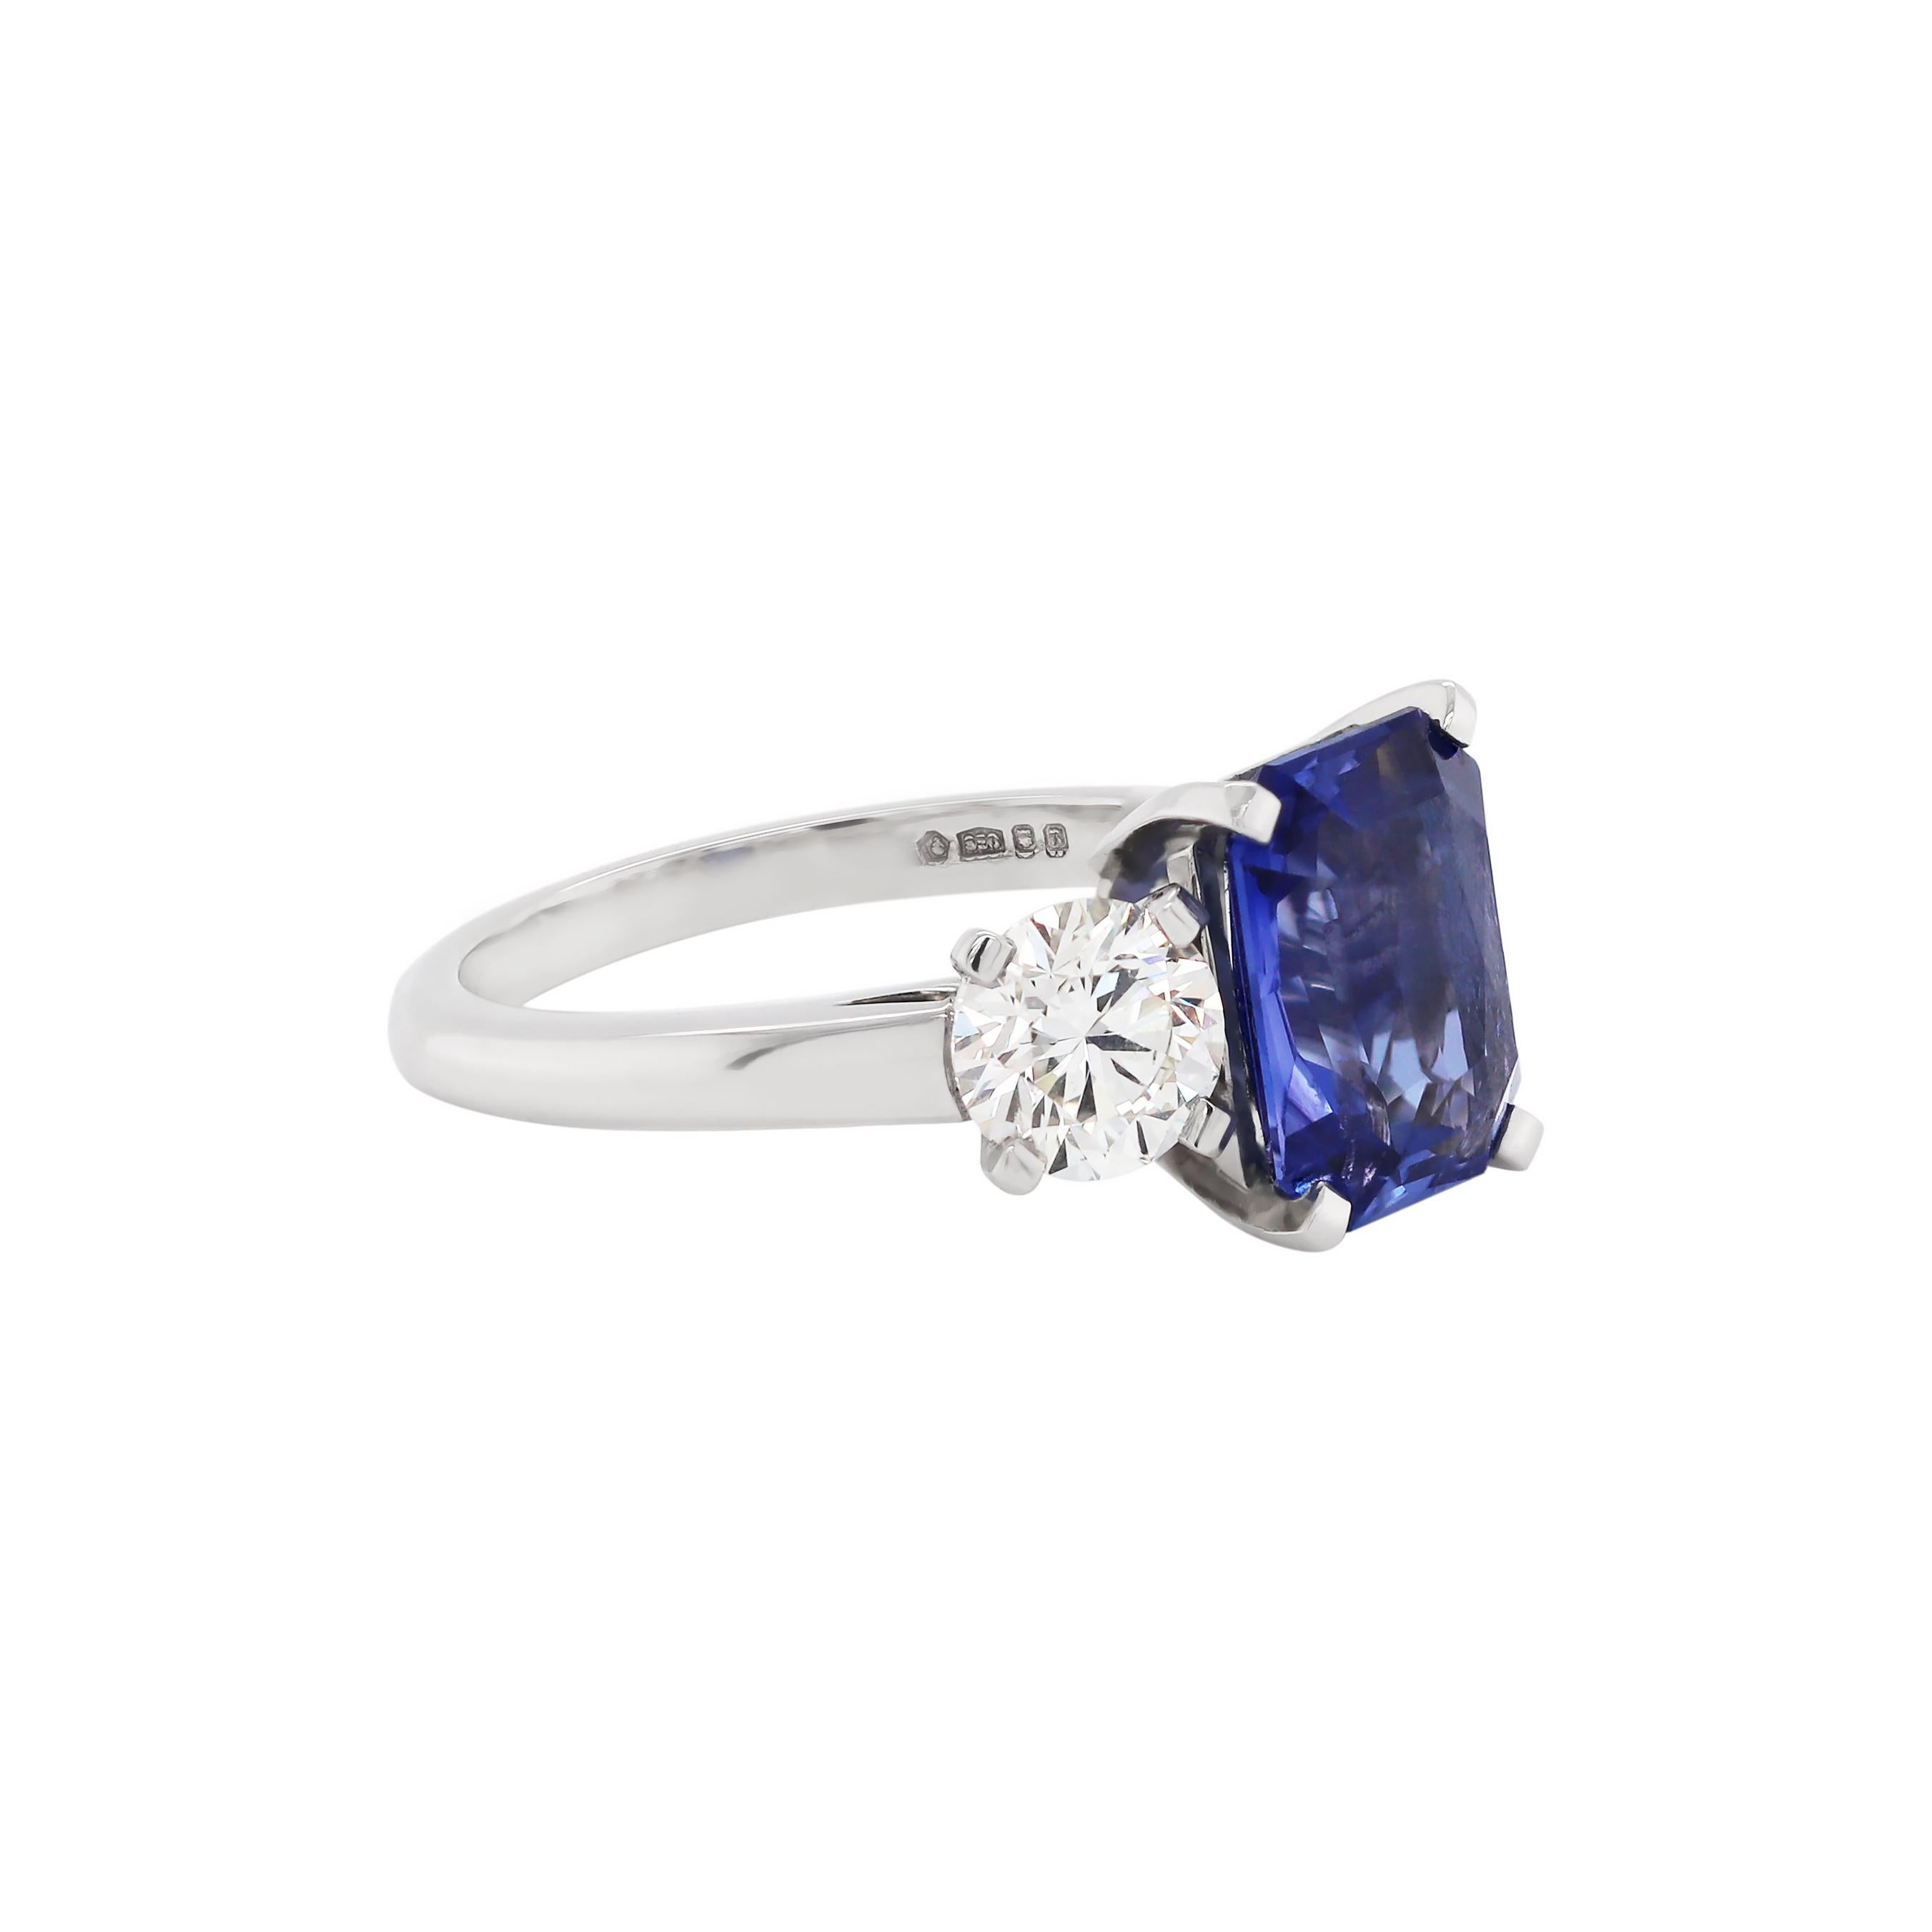 Beautiful handmade engagement ring set with a certified natural unheated transparent blue rectangular cut sapphire weighing a total of 4.02 carats mounted in a four claw, open back setting, accompanied by two round brilliant cut diamonds, one on